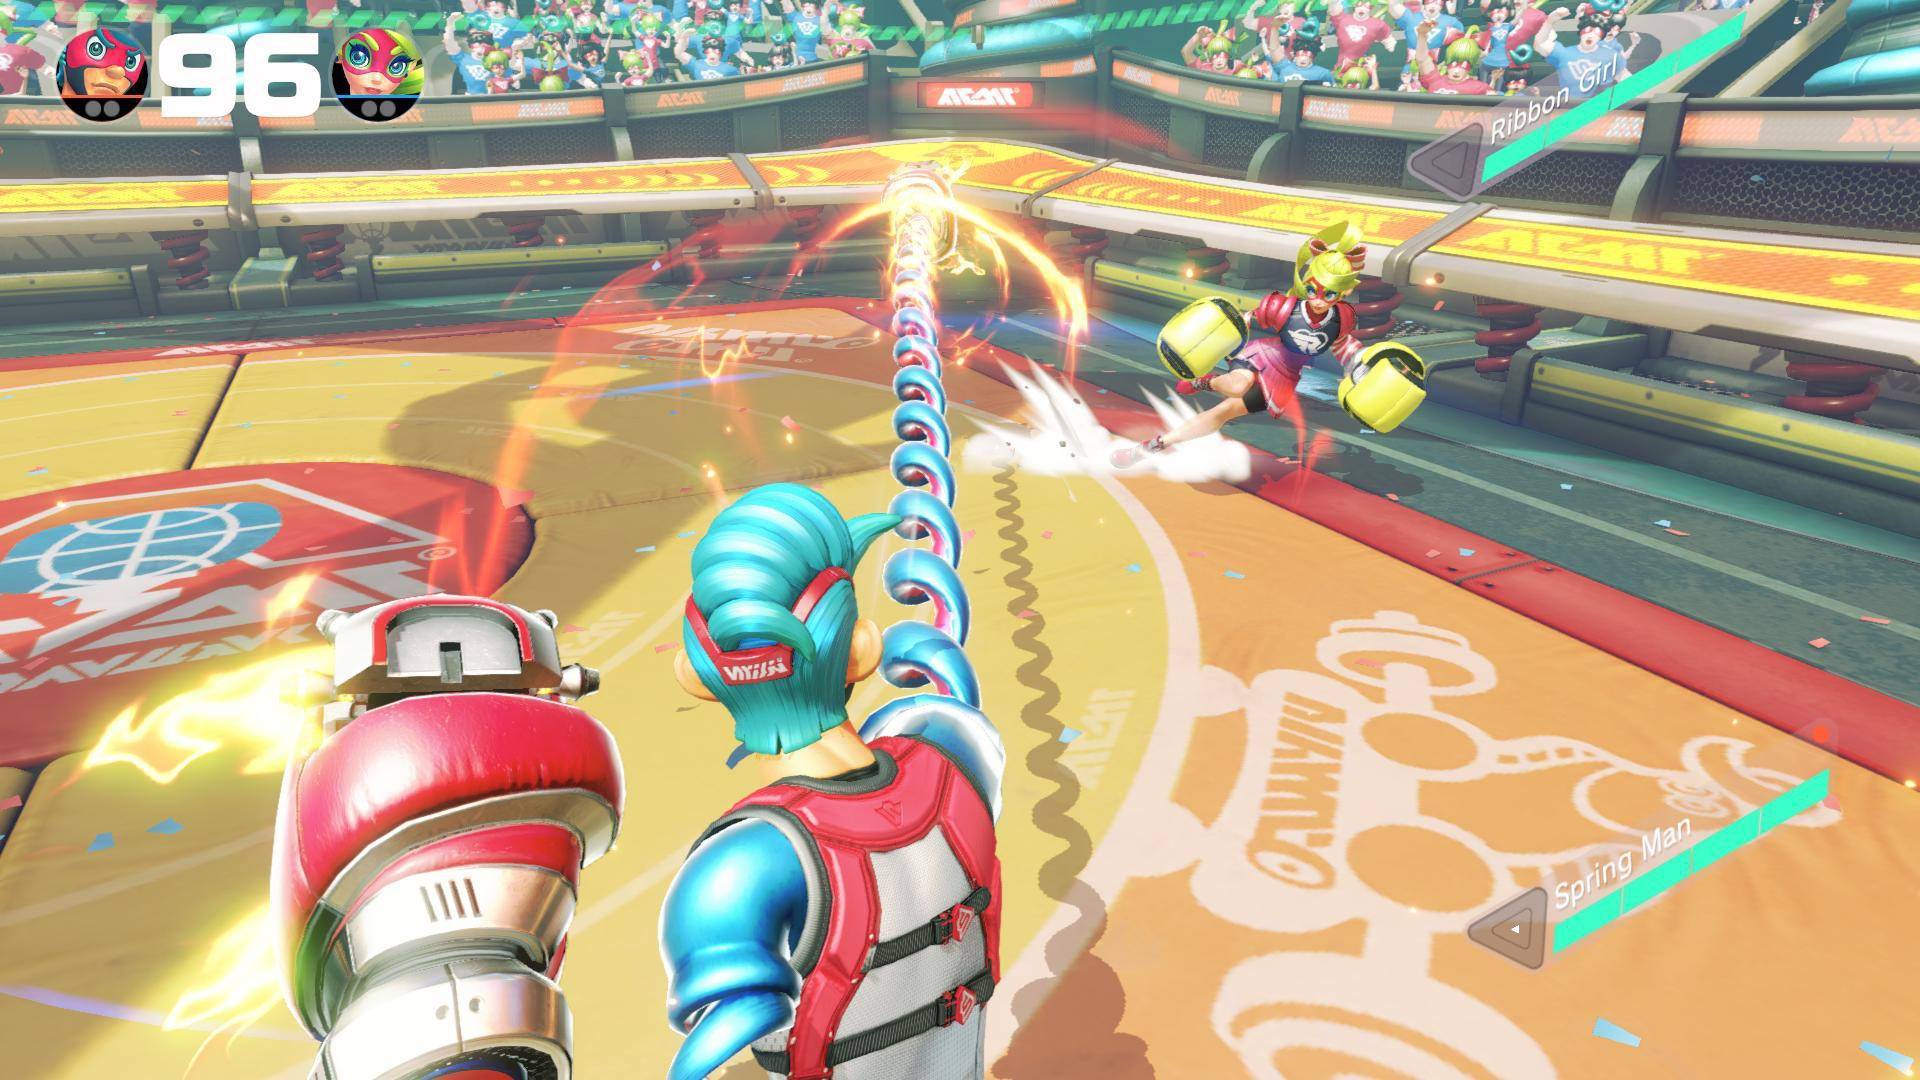 Game: Arms Review